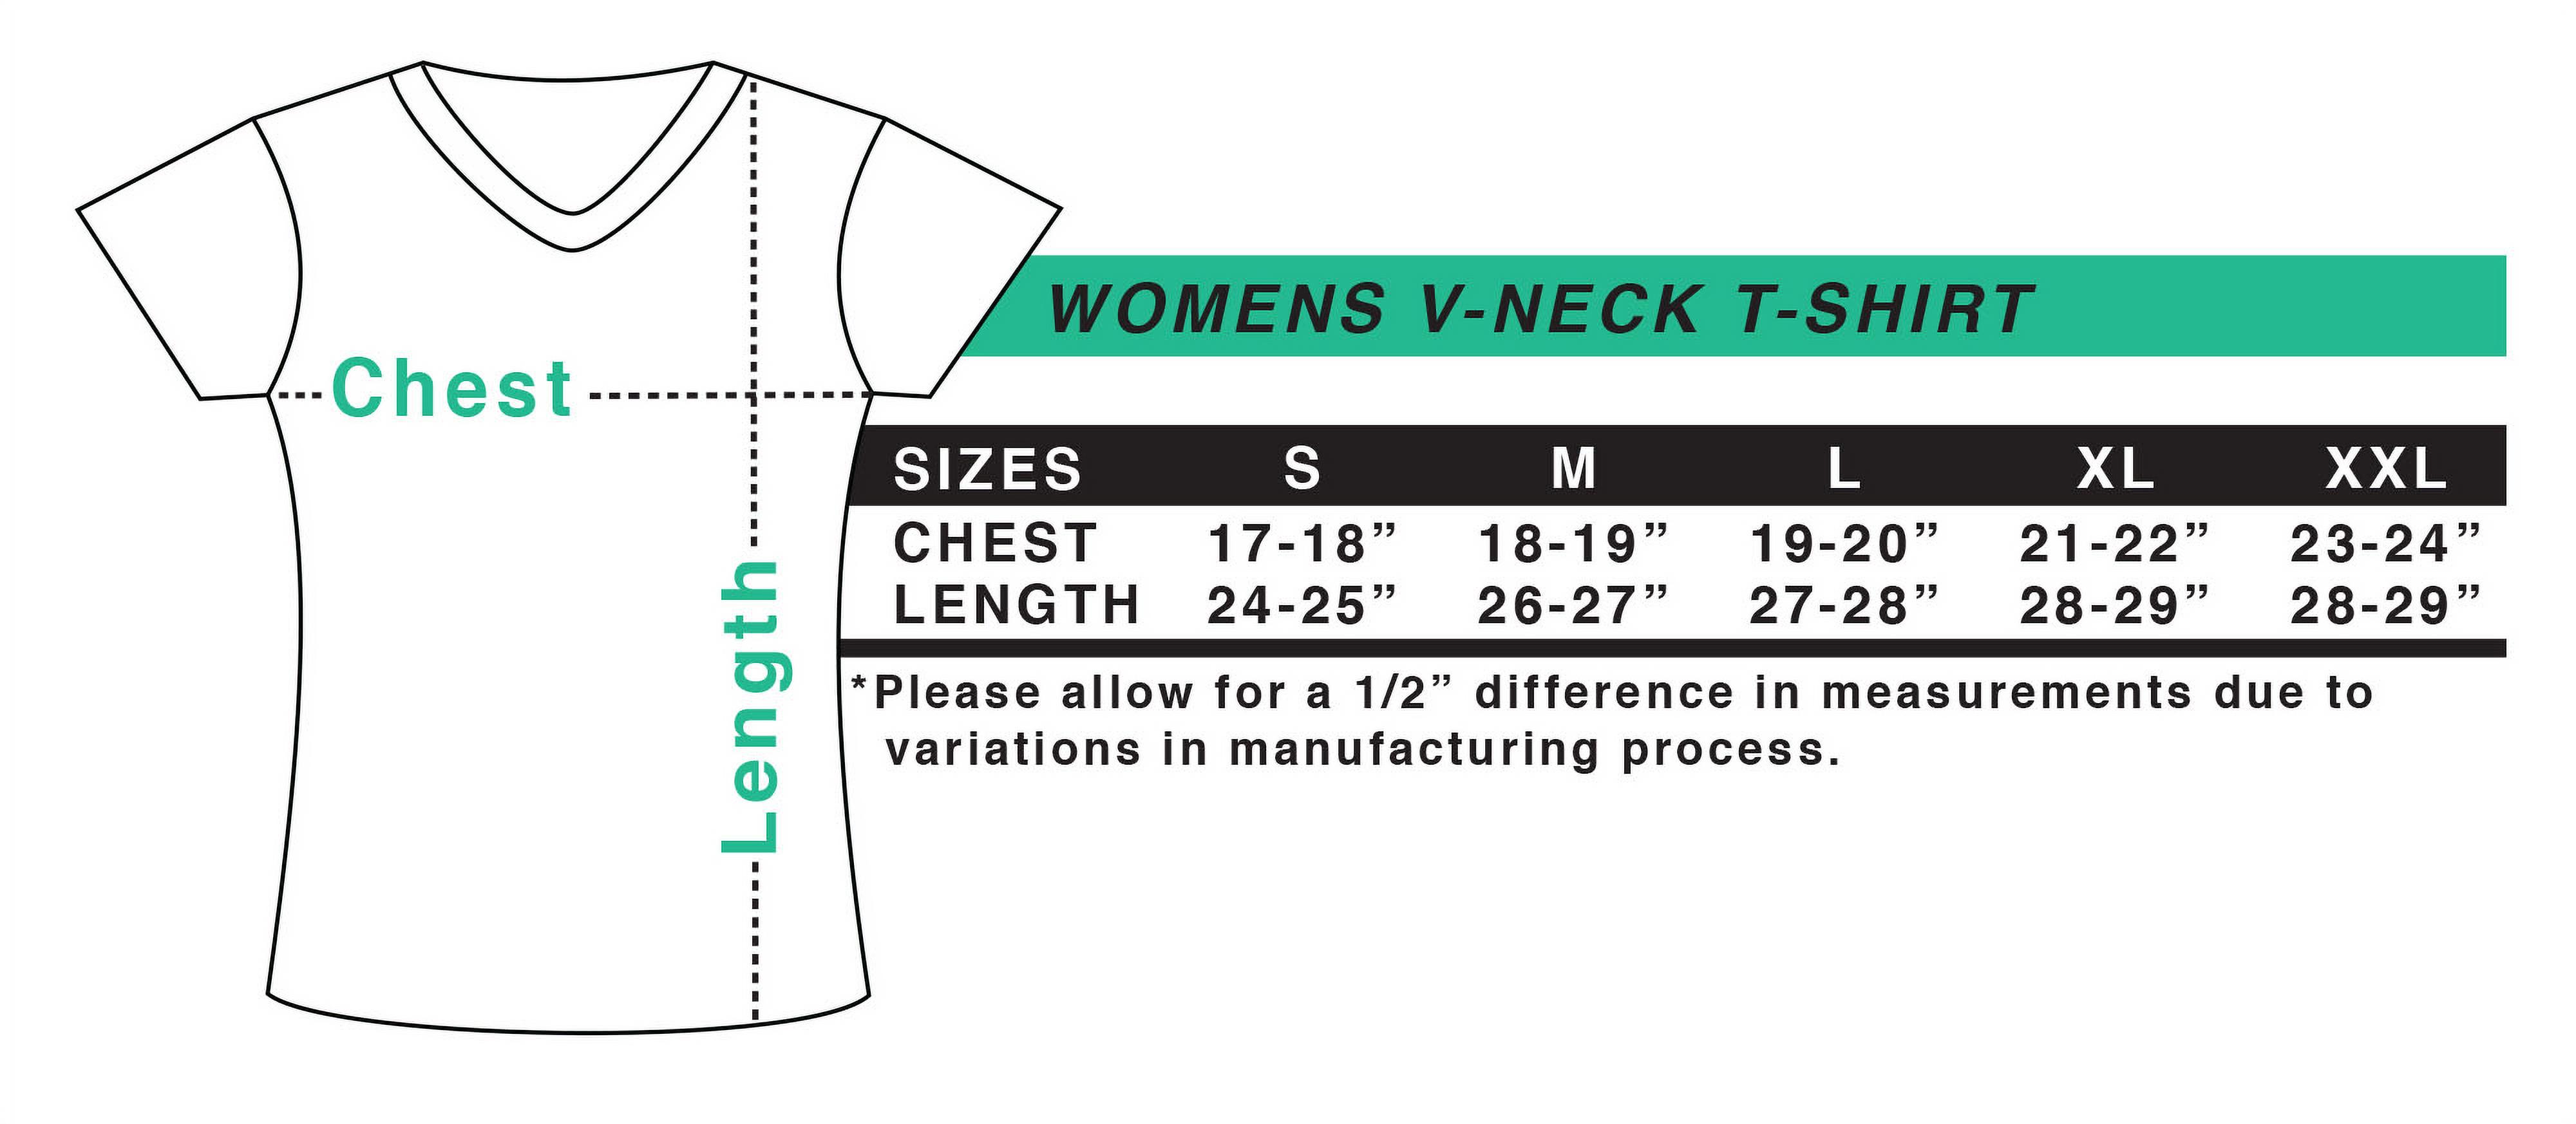 Inktastic Weekends Are for Racing Race Car Silhouette and Racing Flag Women's V-Neck T-Shirt - image 2 of 4